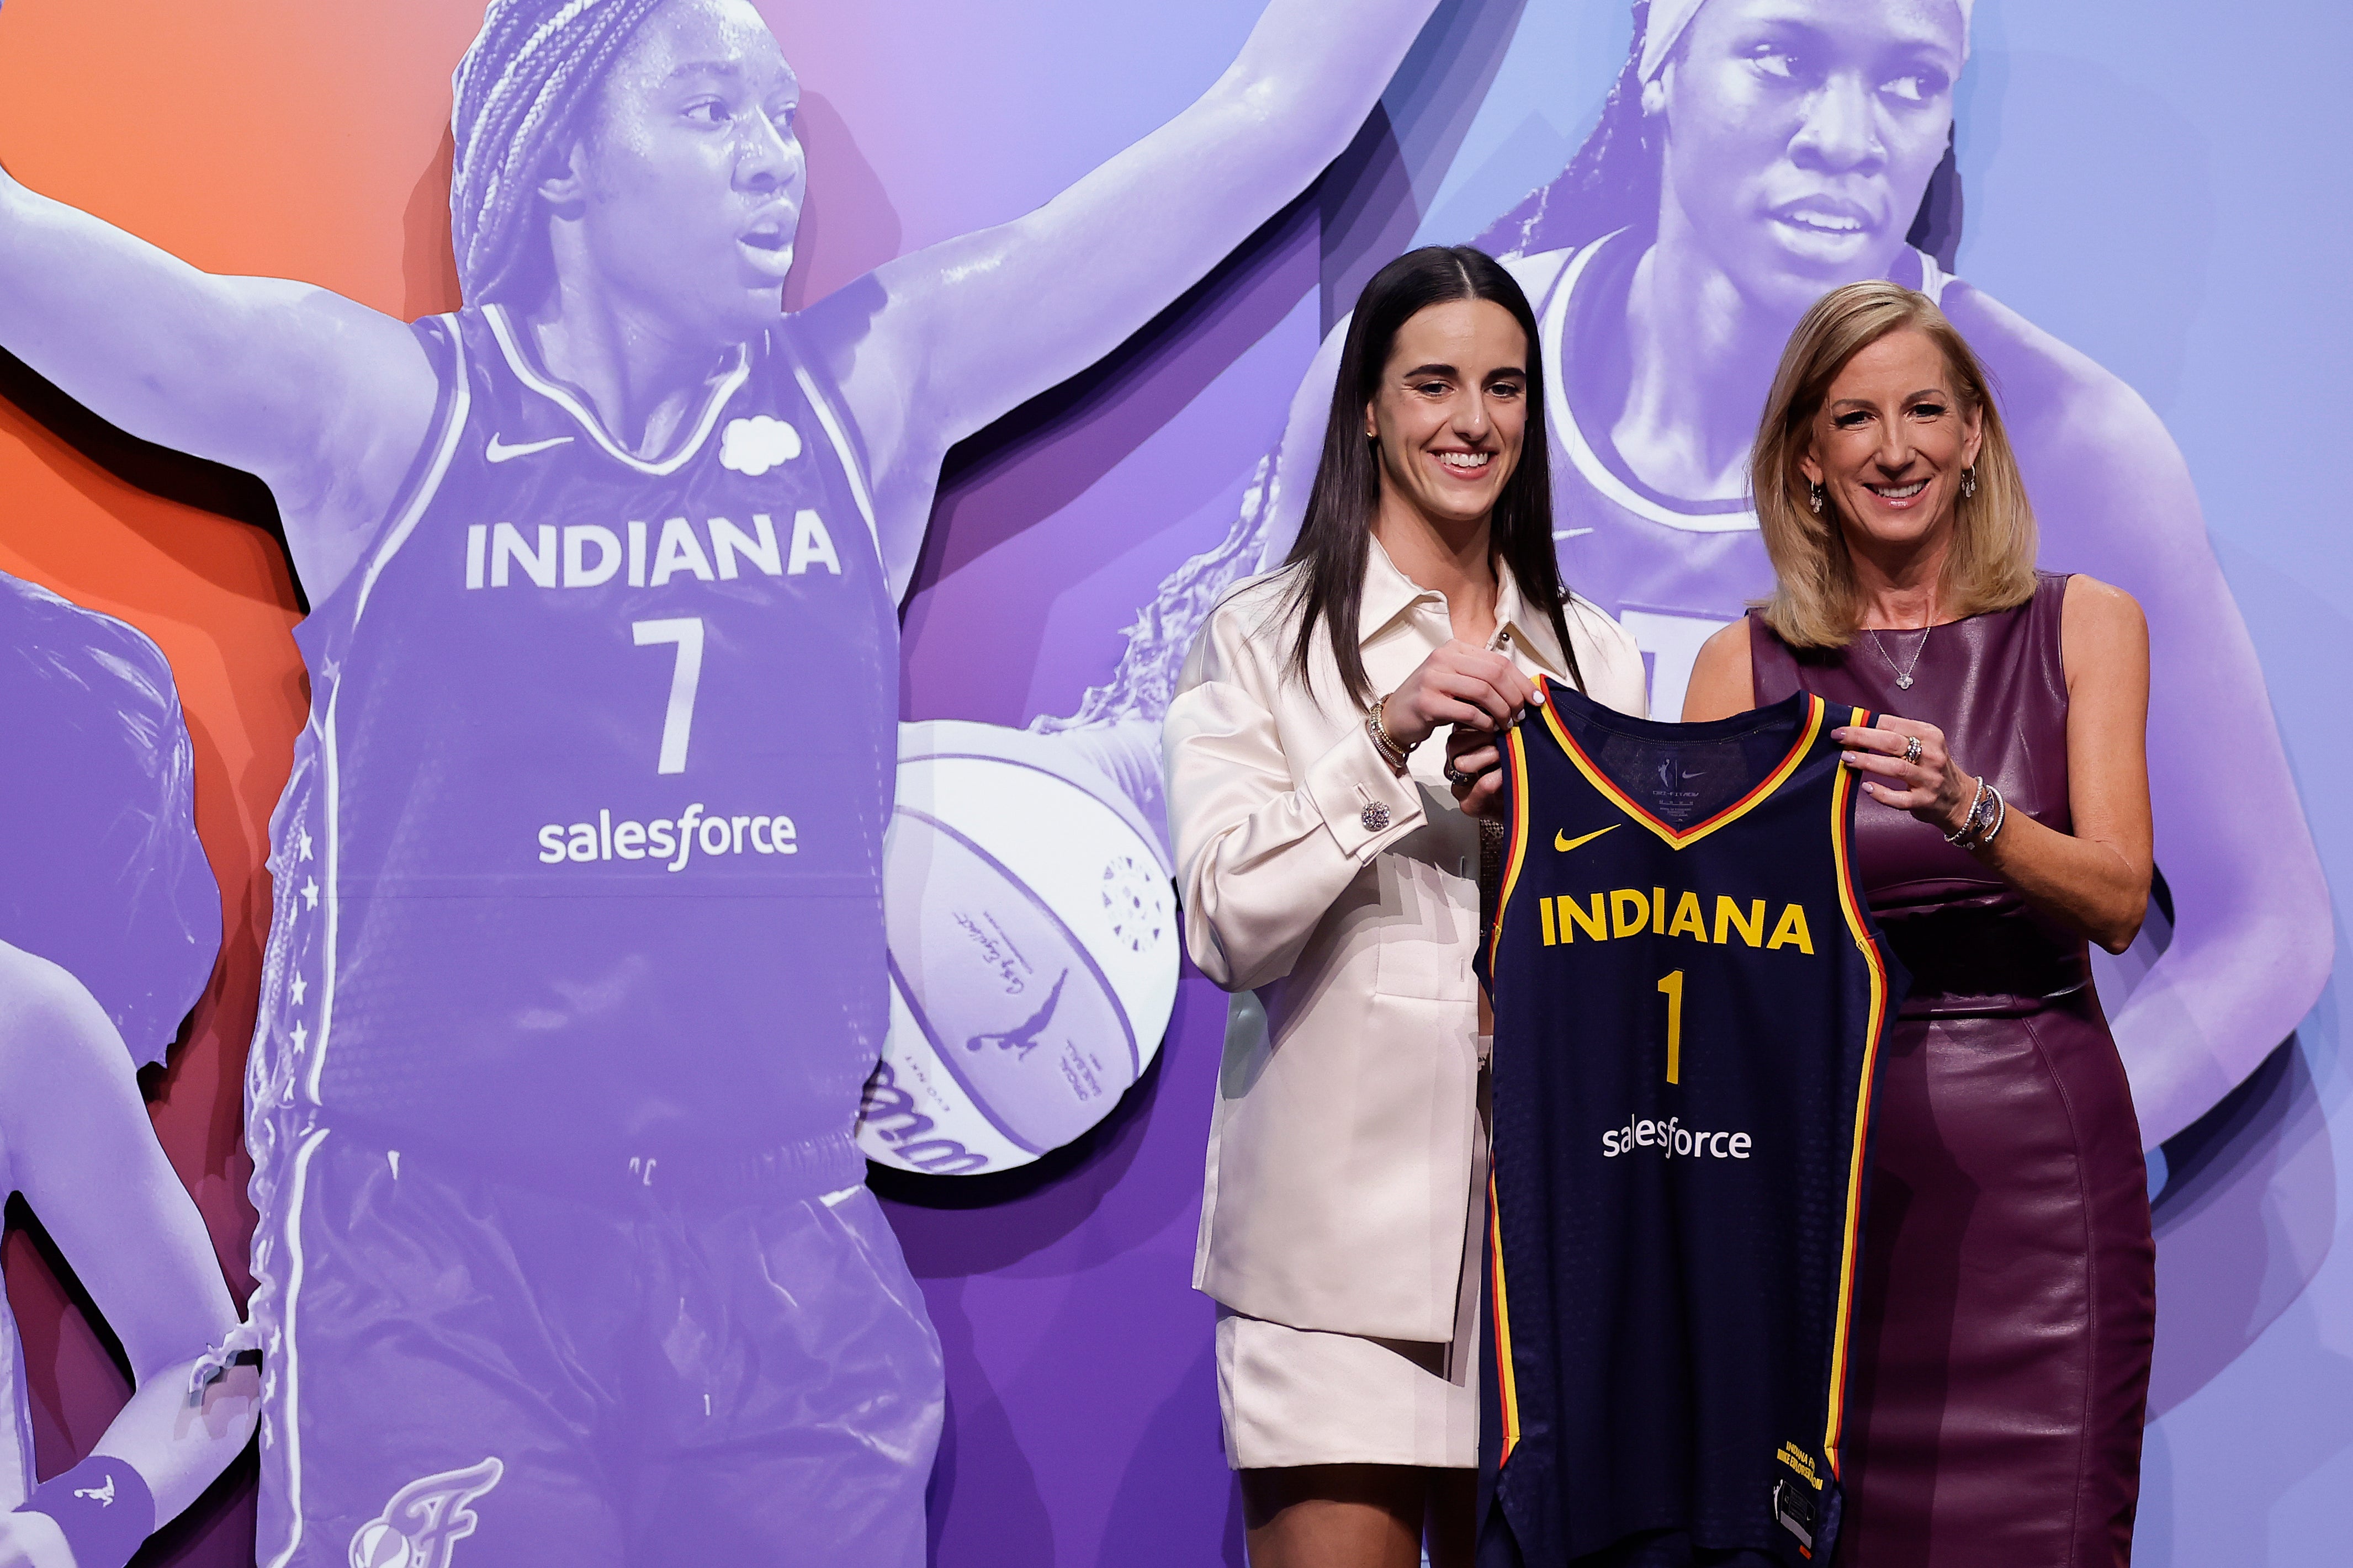 Iowa's Caitlyn Clark, left, poses for a photo with WNBA commissioner Cathy Engelbert after being selected first overall by the Indiana Fever during the first round of the WNBA basketball draft